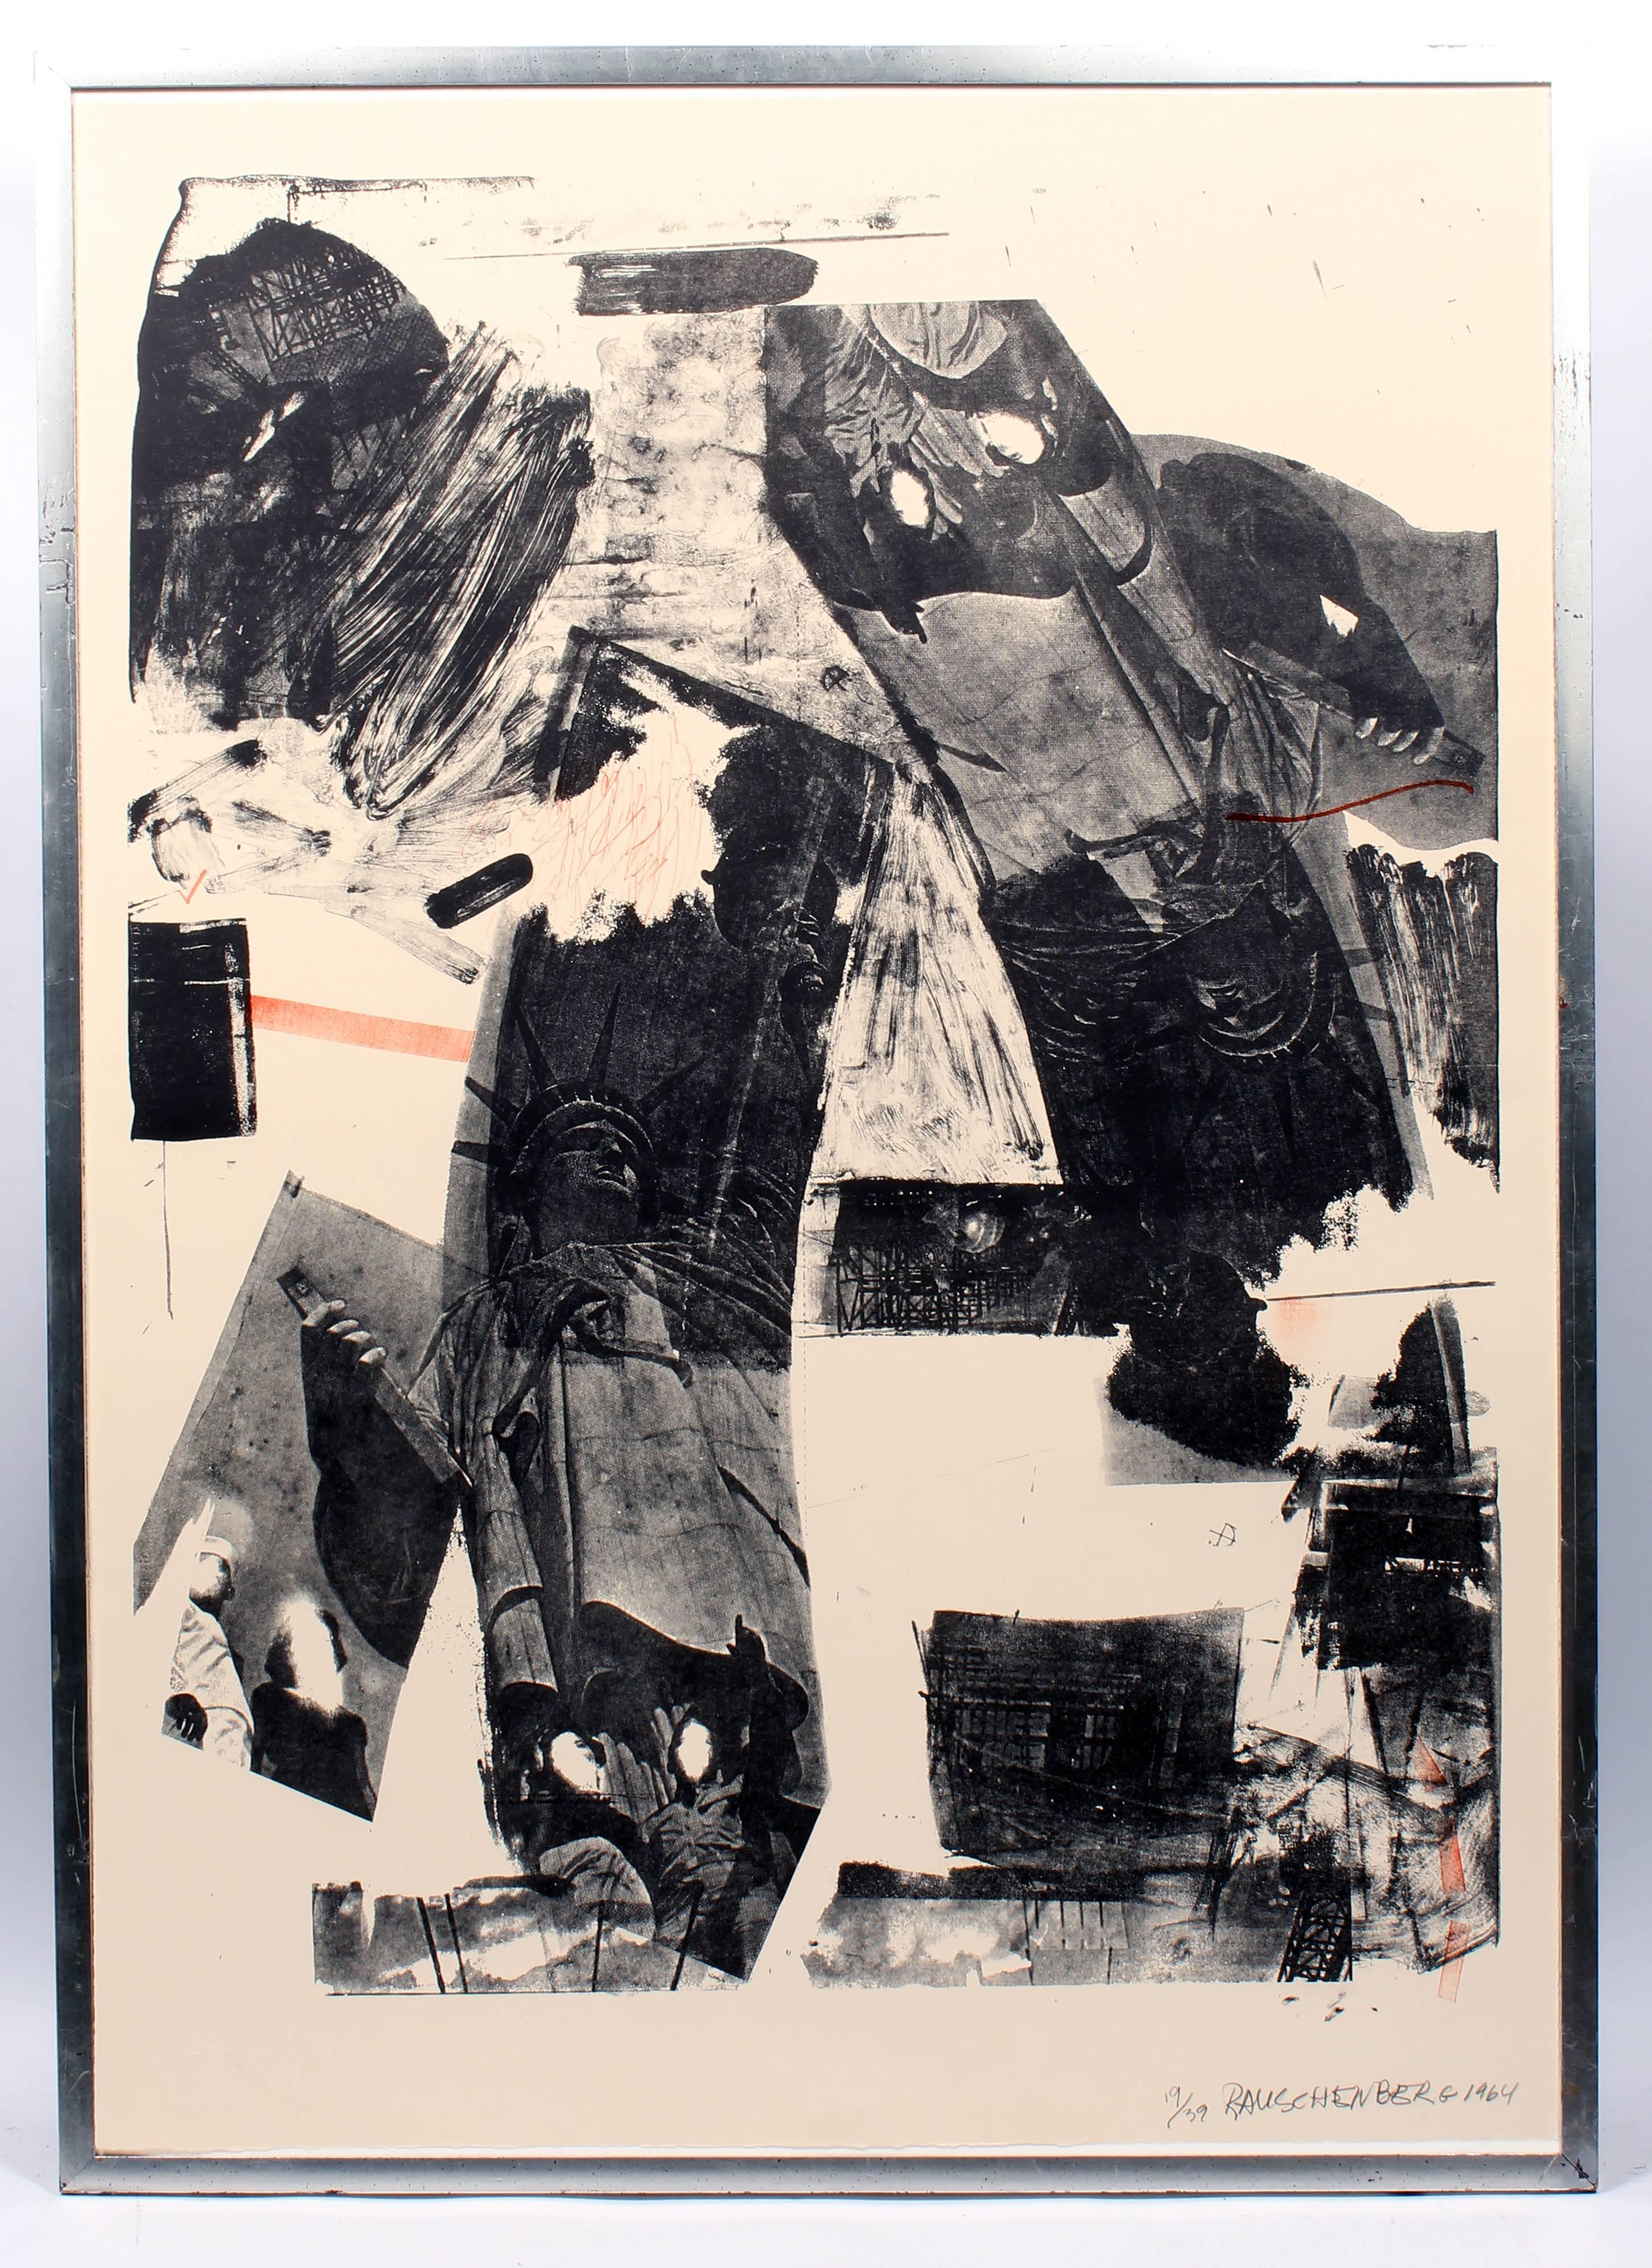 A rare original hand signed and numbered lithograph by American artist Robert Rauschenberg titled 